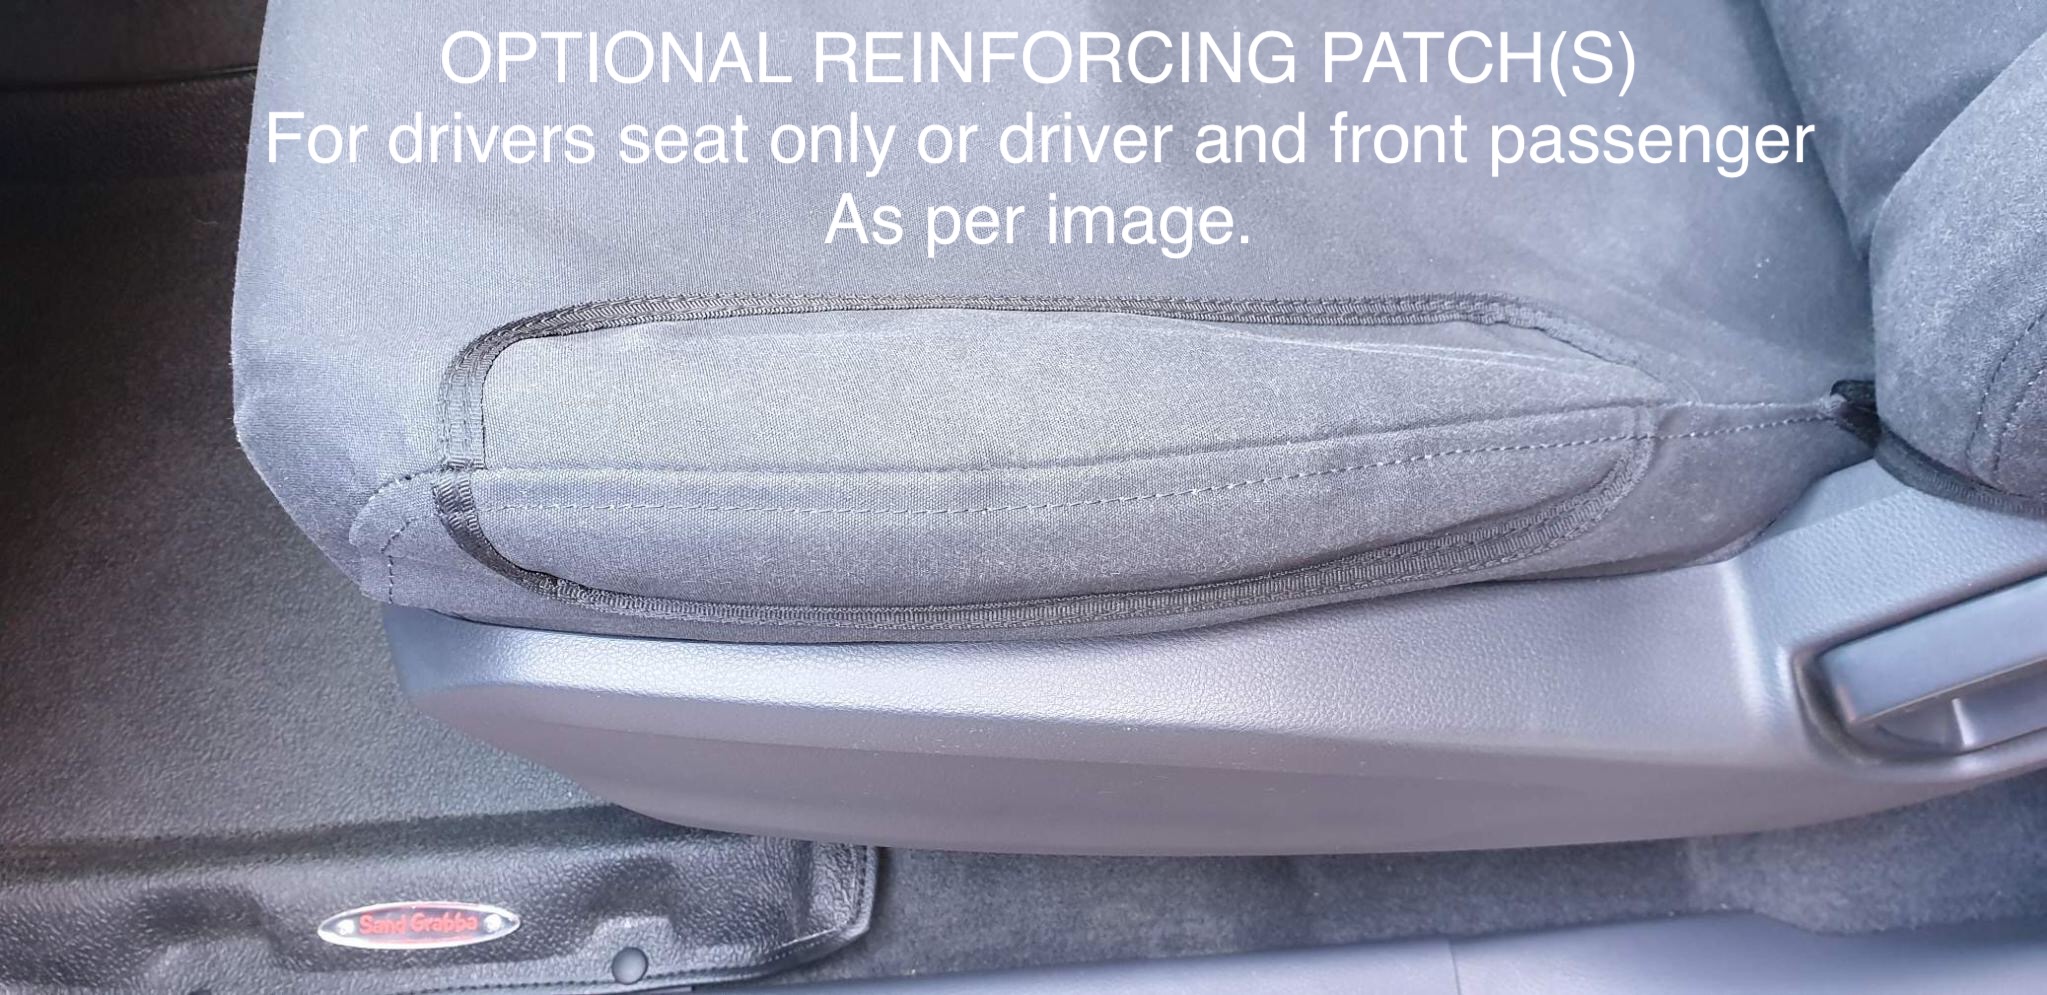 Image of Reinforcing patch sewn onto a passenger seat.